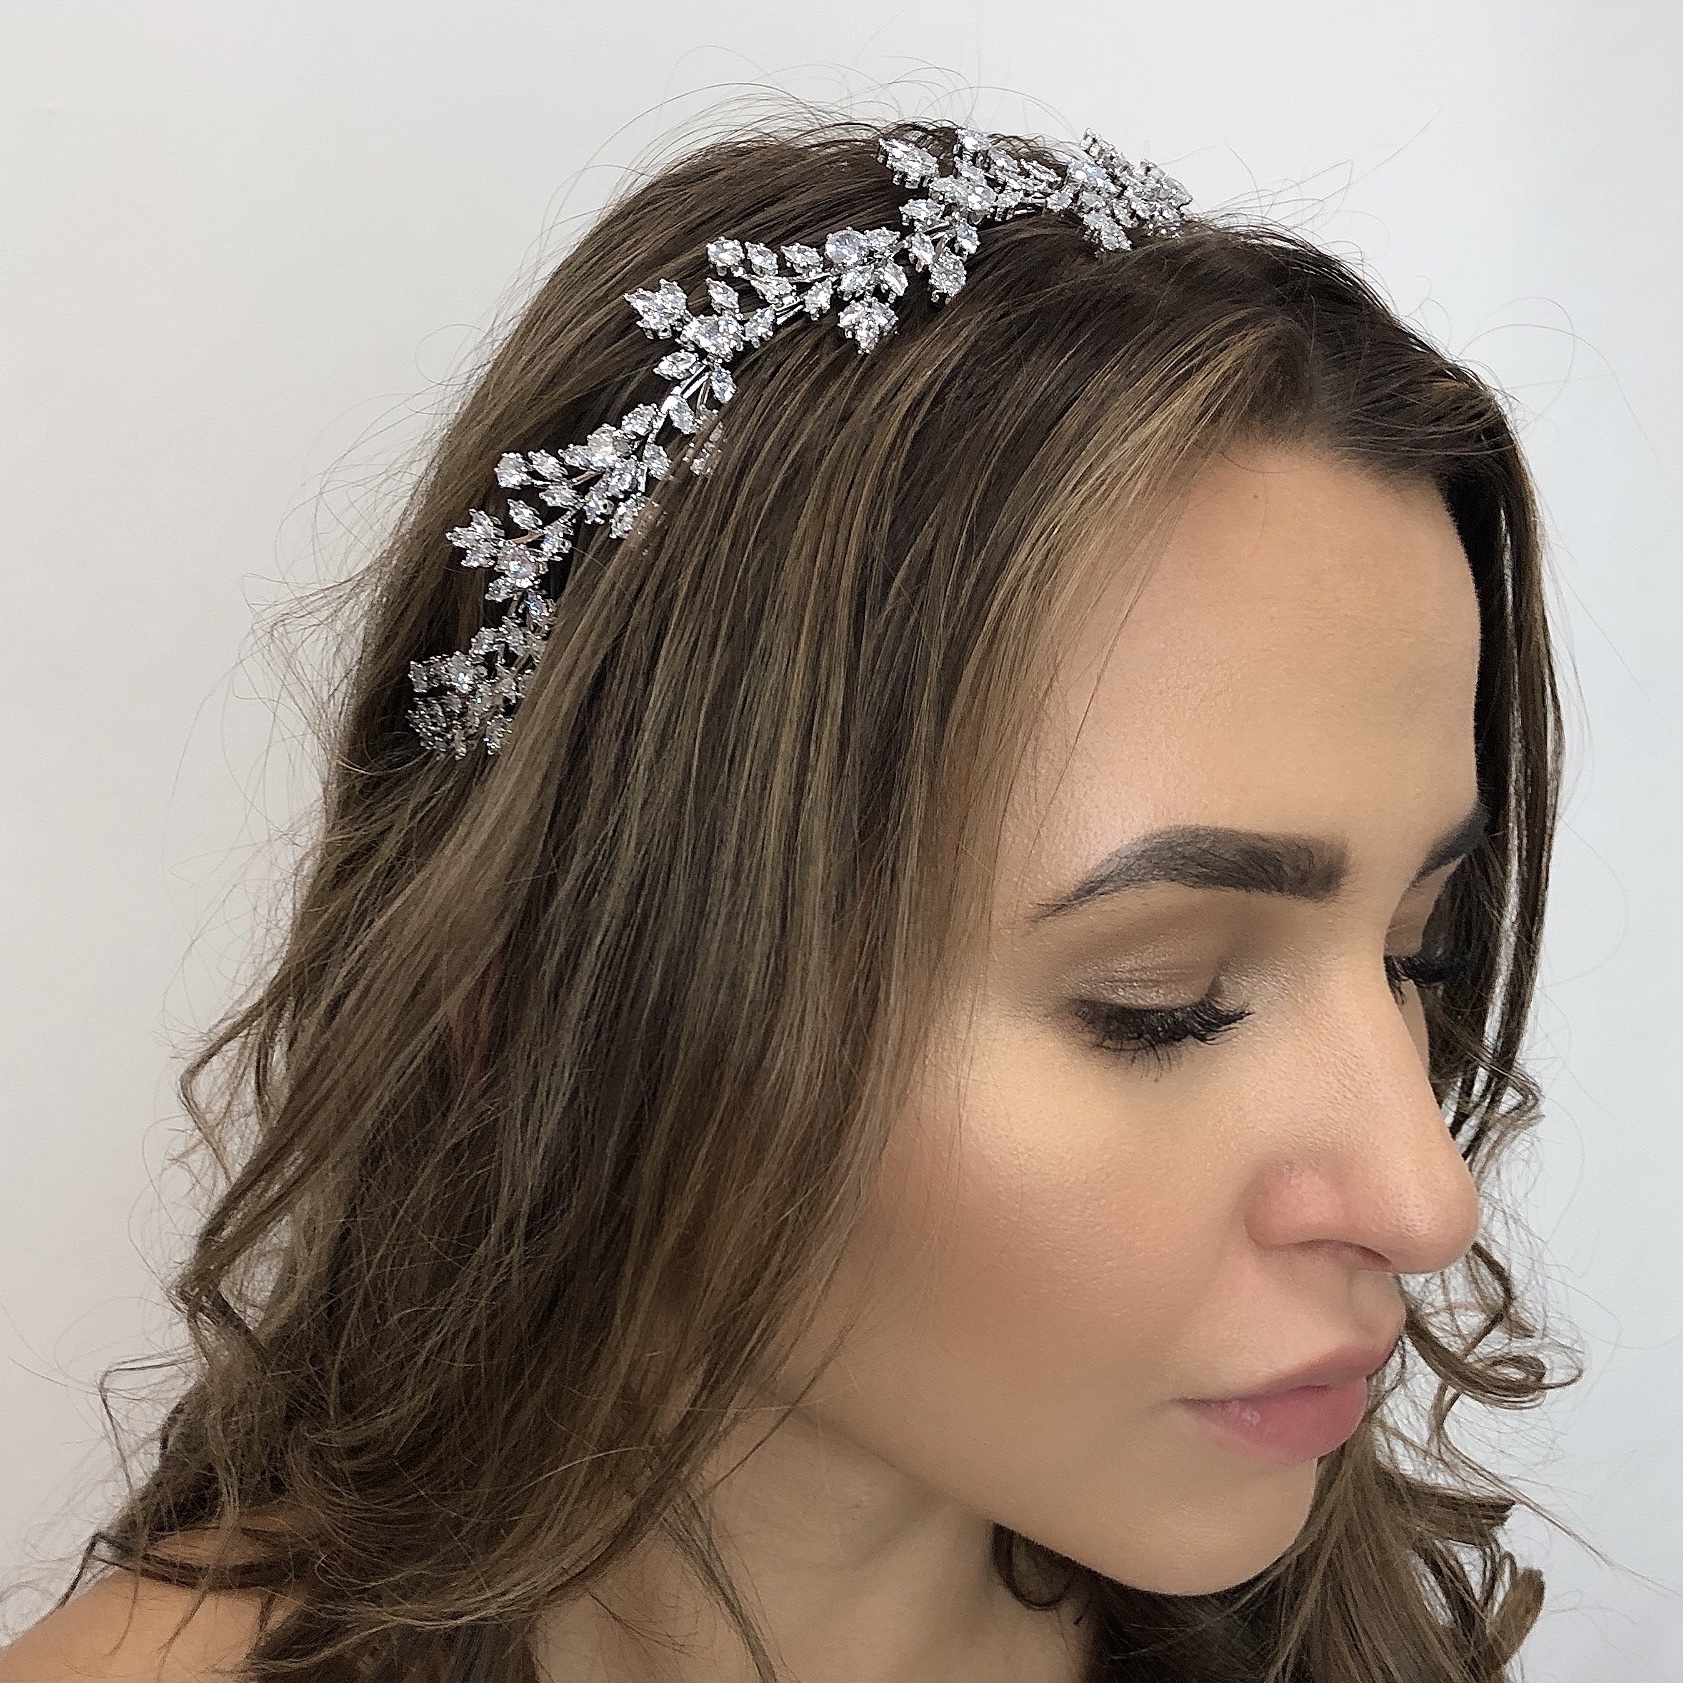 We love the affect created with various shaped crystals that are meticulously assembled with the finest grade cubic zirconia. Individually hand set, just like diamonds, their brilliance will shine bright, catching the light as you enjoy your wedding day. The intricate details of this bridal headpiece will be appreciated by the discerning bride and is a stunning addition to your wedding look evoking a confidence that lets you shine inside and out.